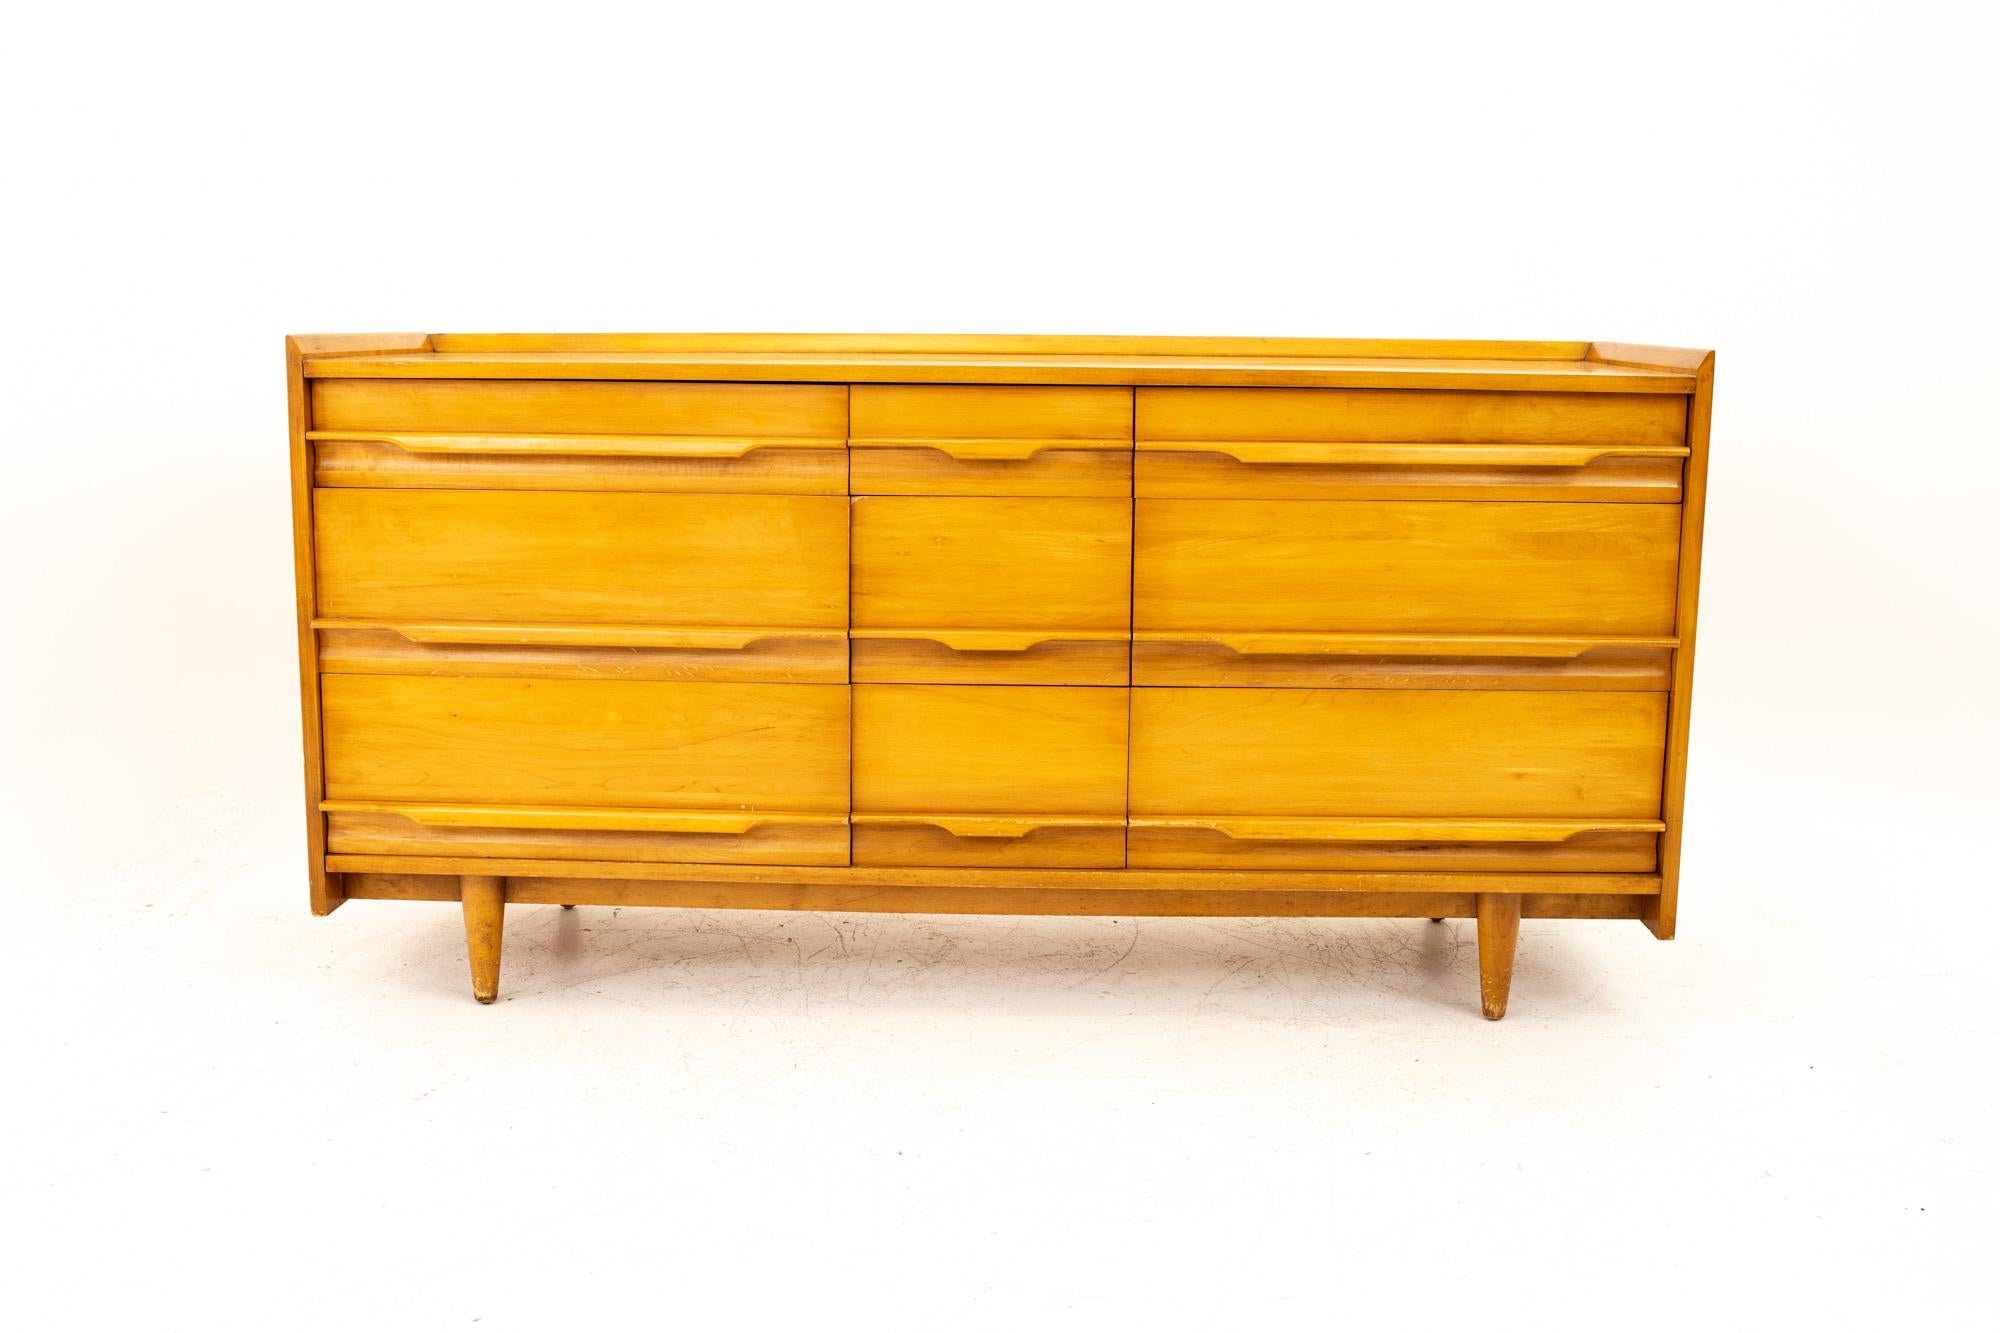 Milo Baughman style Crawford Furniture Mid Century blonde 9-drawer lowboy dresser
Dresser measures: 60 wide x 19 deep x 29 high

All pieces of furniture can be had in what we call restored vintage condition. That means the piece is restored upon